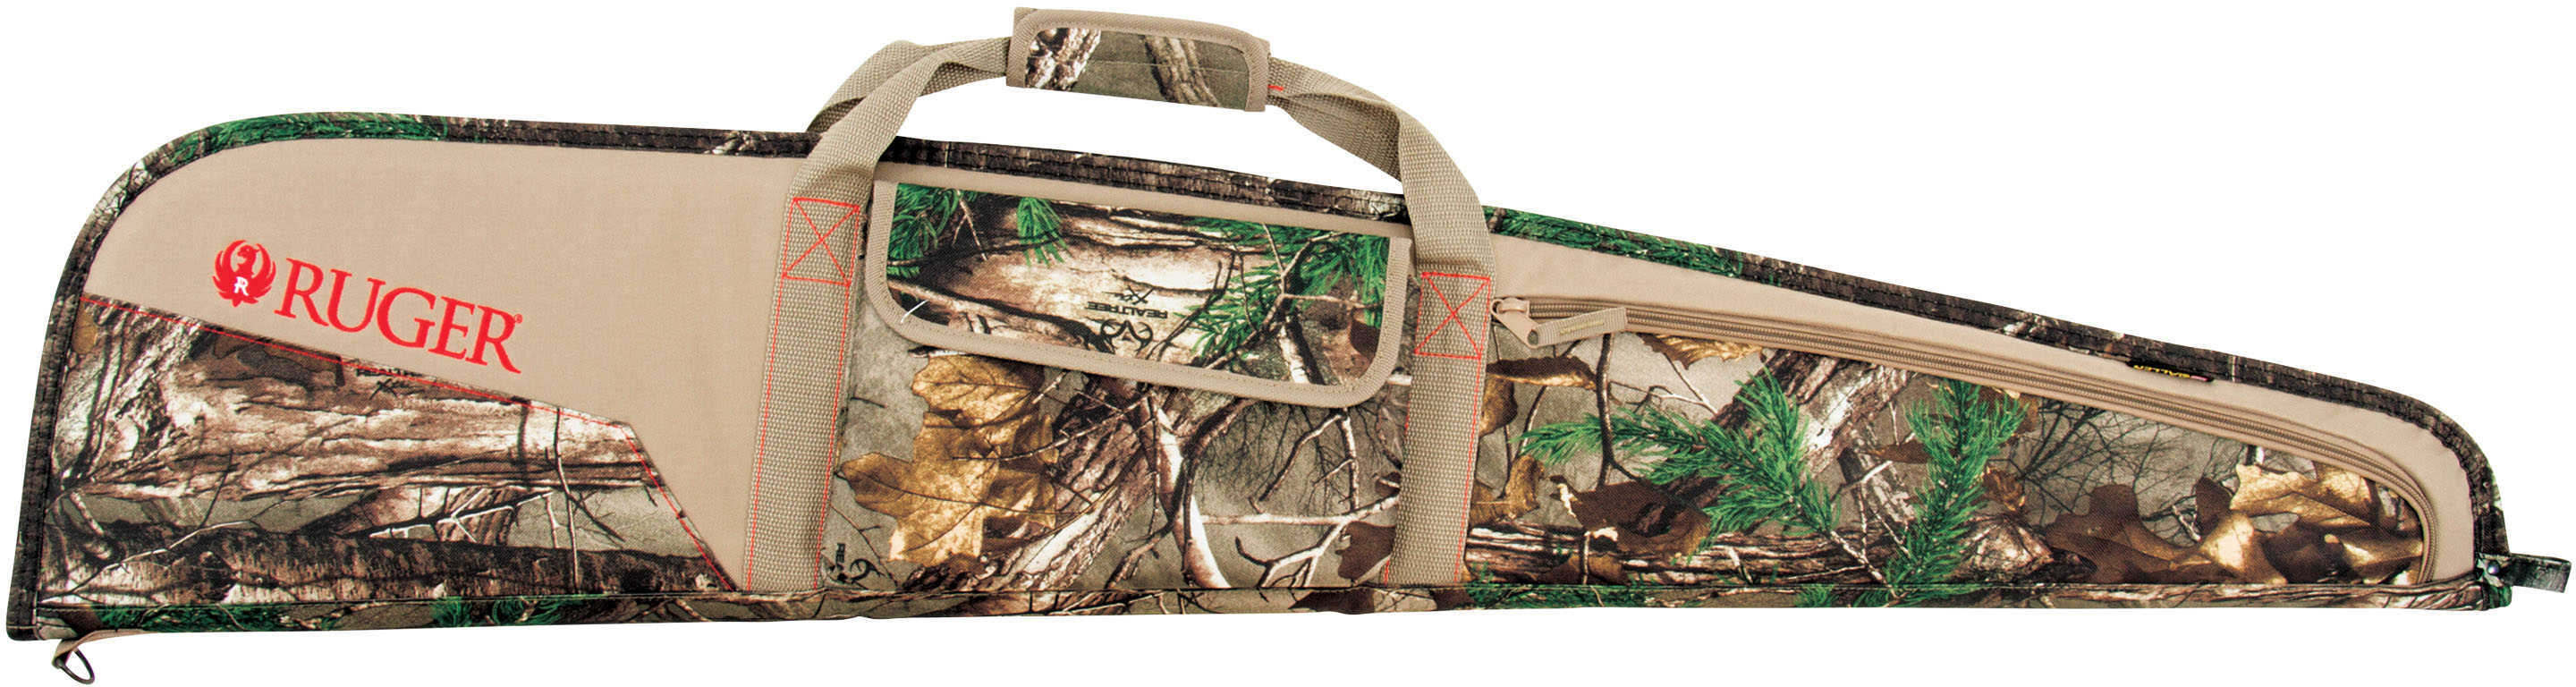 Allen Cases Ruger Yuma 46-Inch Rifle 2 Pockets Tan/Realtree Xtra Md: 27439